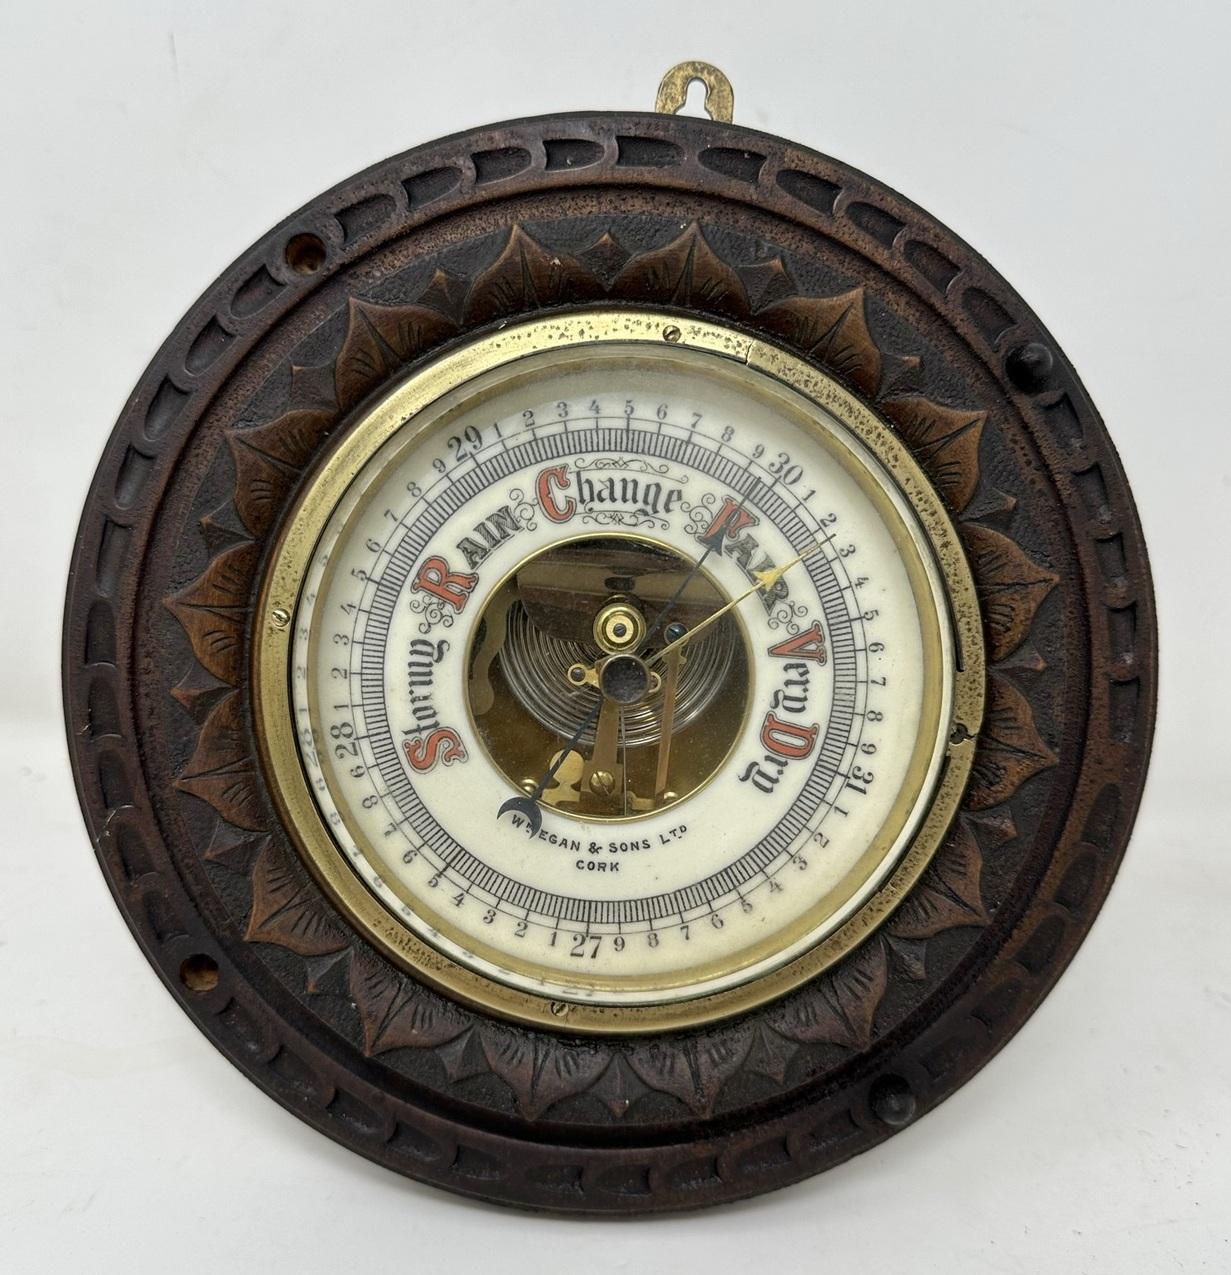 A Wonderful Hand Carved Irish Oak Aneroid Wall Barometer of compact size, encased within a circular oak case with attractive leaf carvings. Retailed by William Egan & Sons. Patrick Street, Cork, Ireland. Mid to late Nineteenth Century. 

Brass Bezel